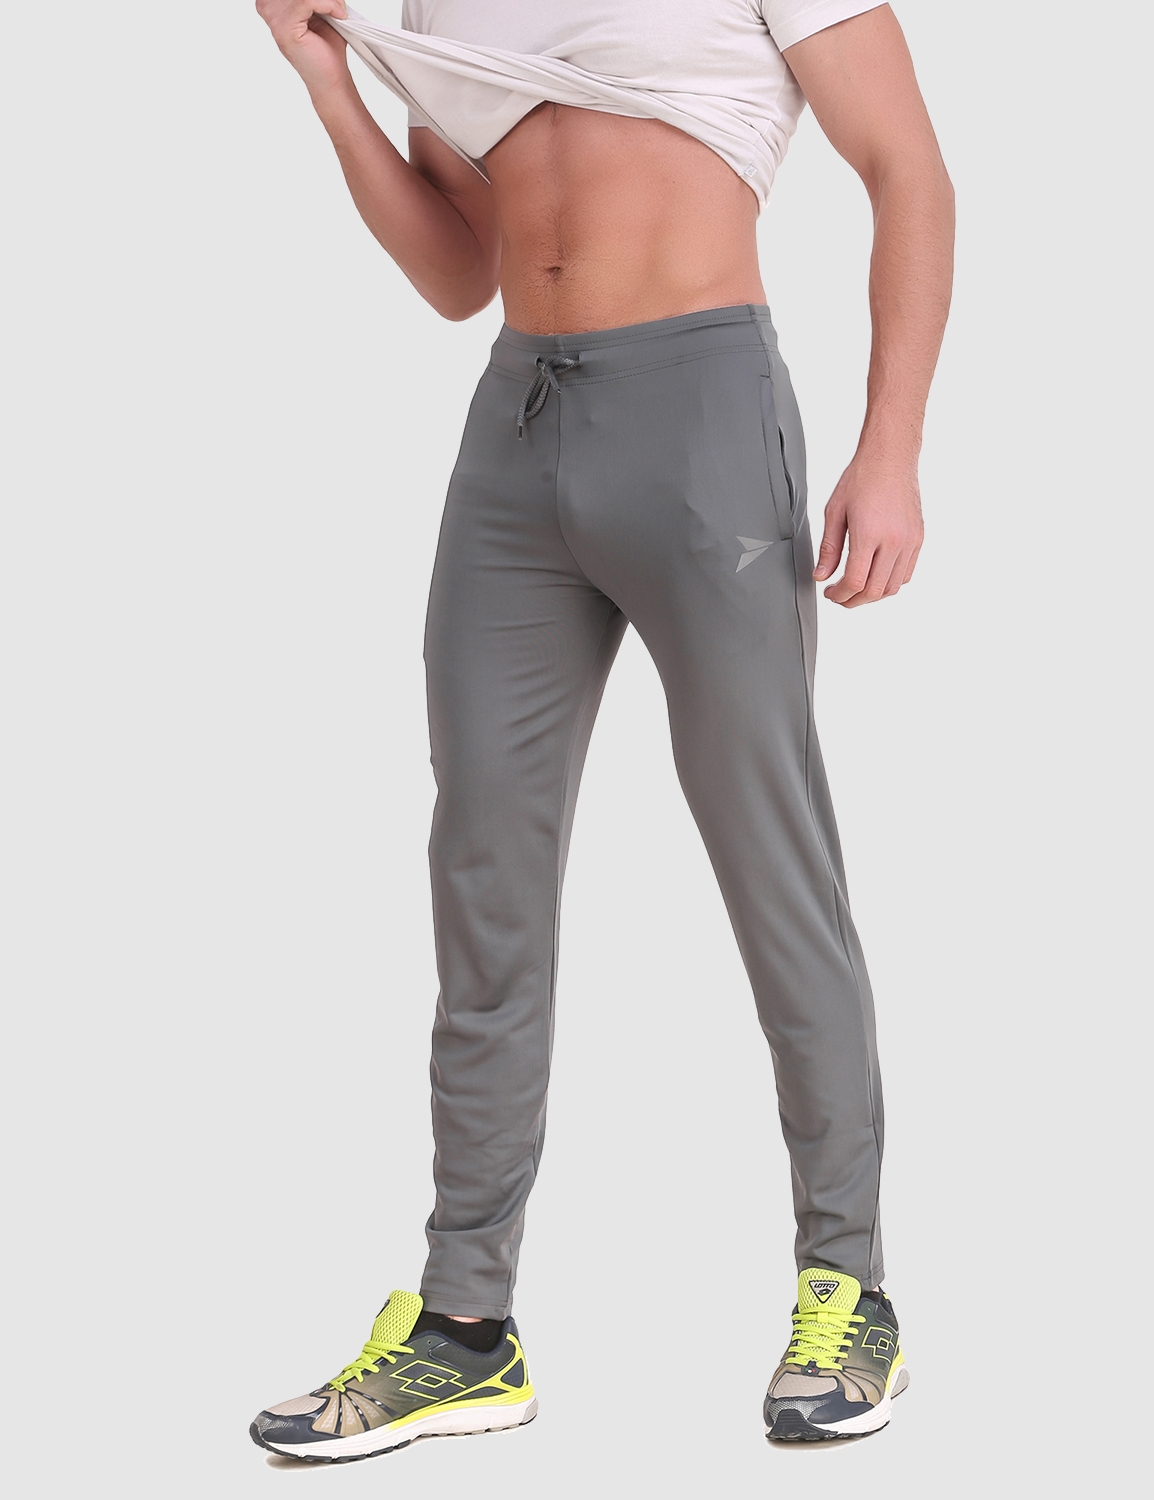 Fitinc | Fitinc Slim Fit Grey Track Pant for Workout